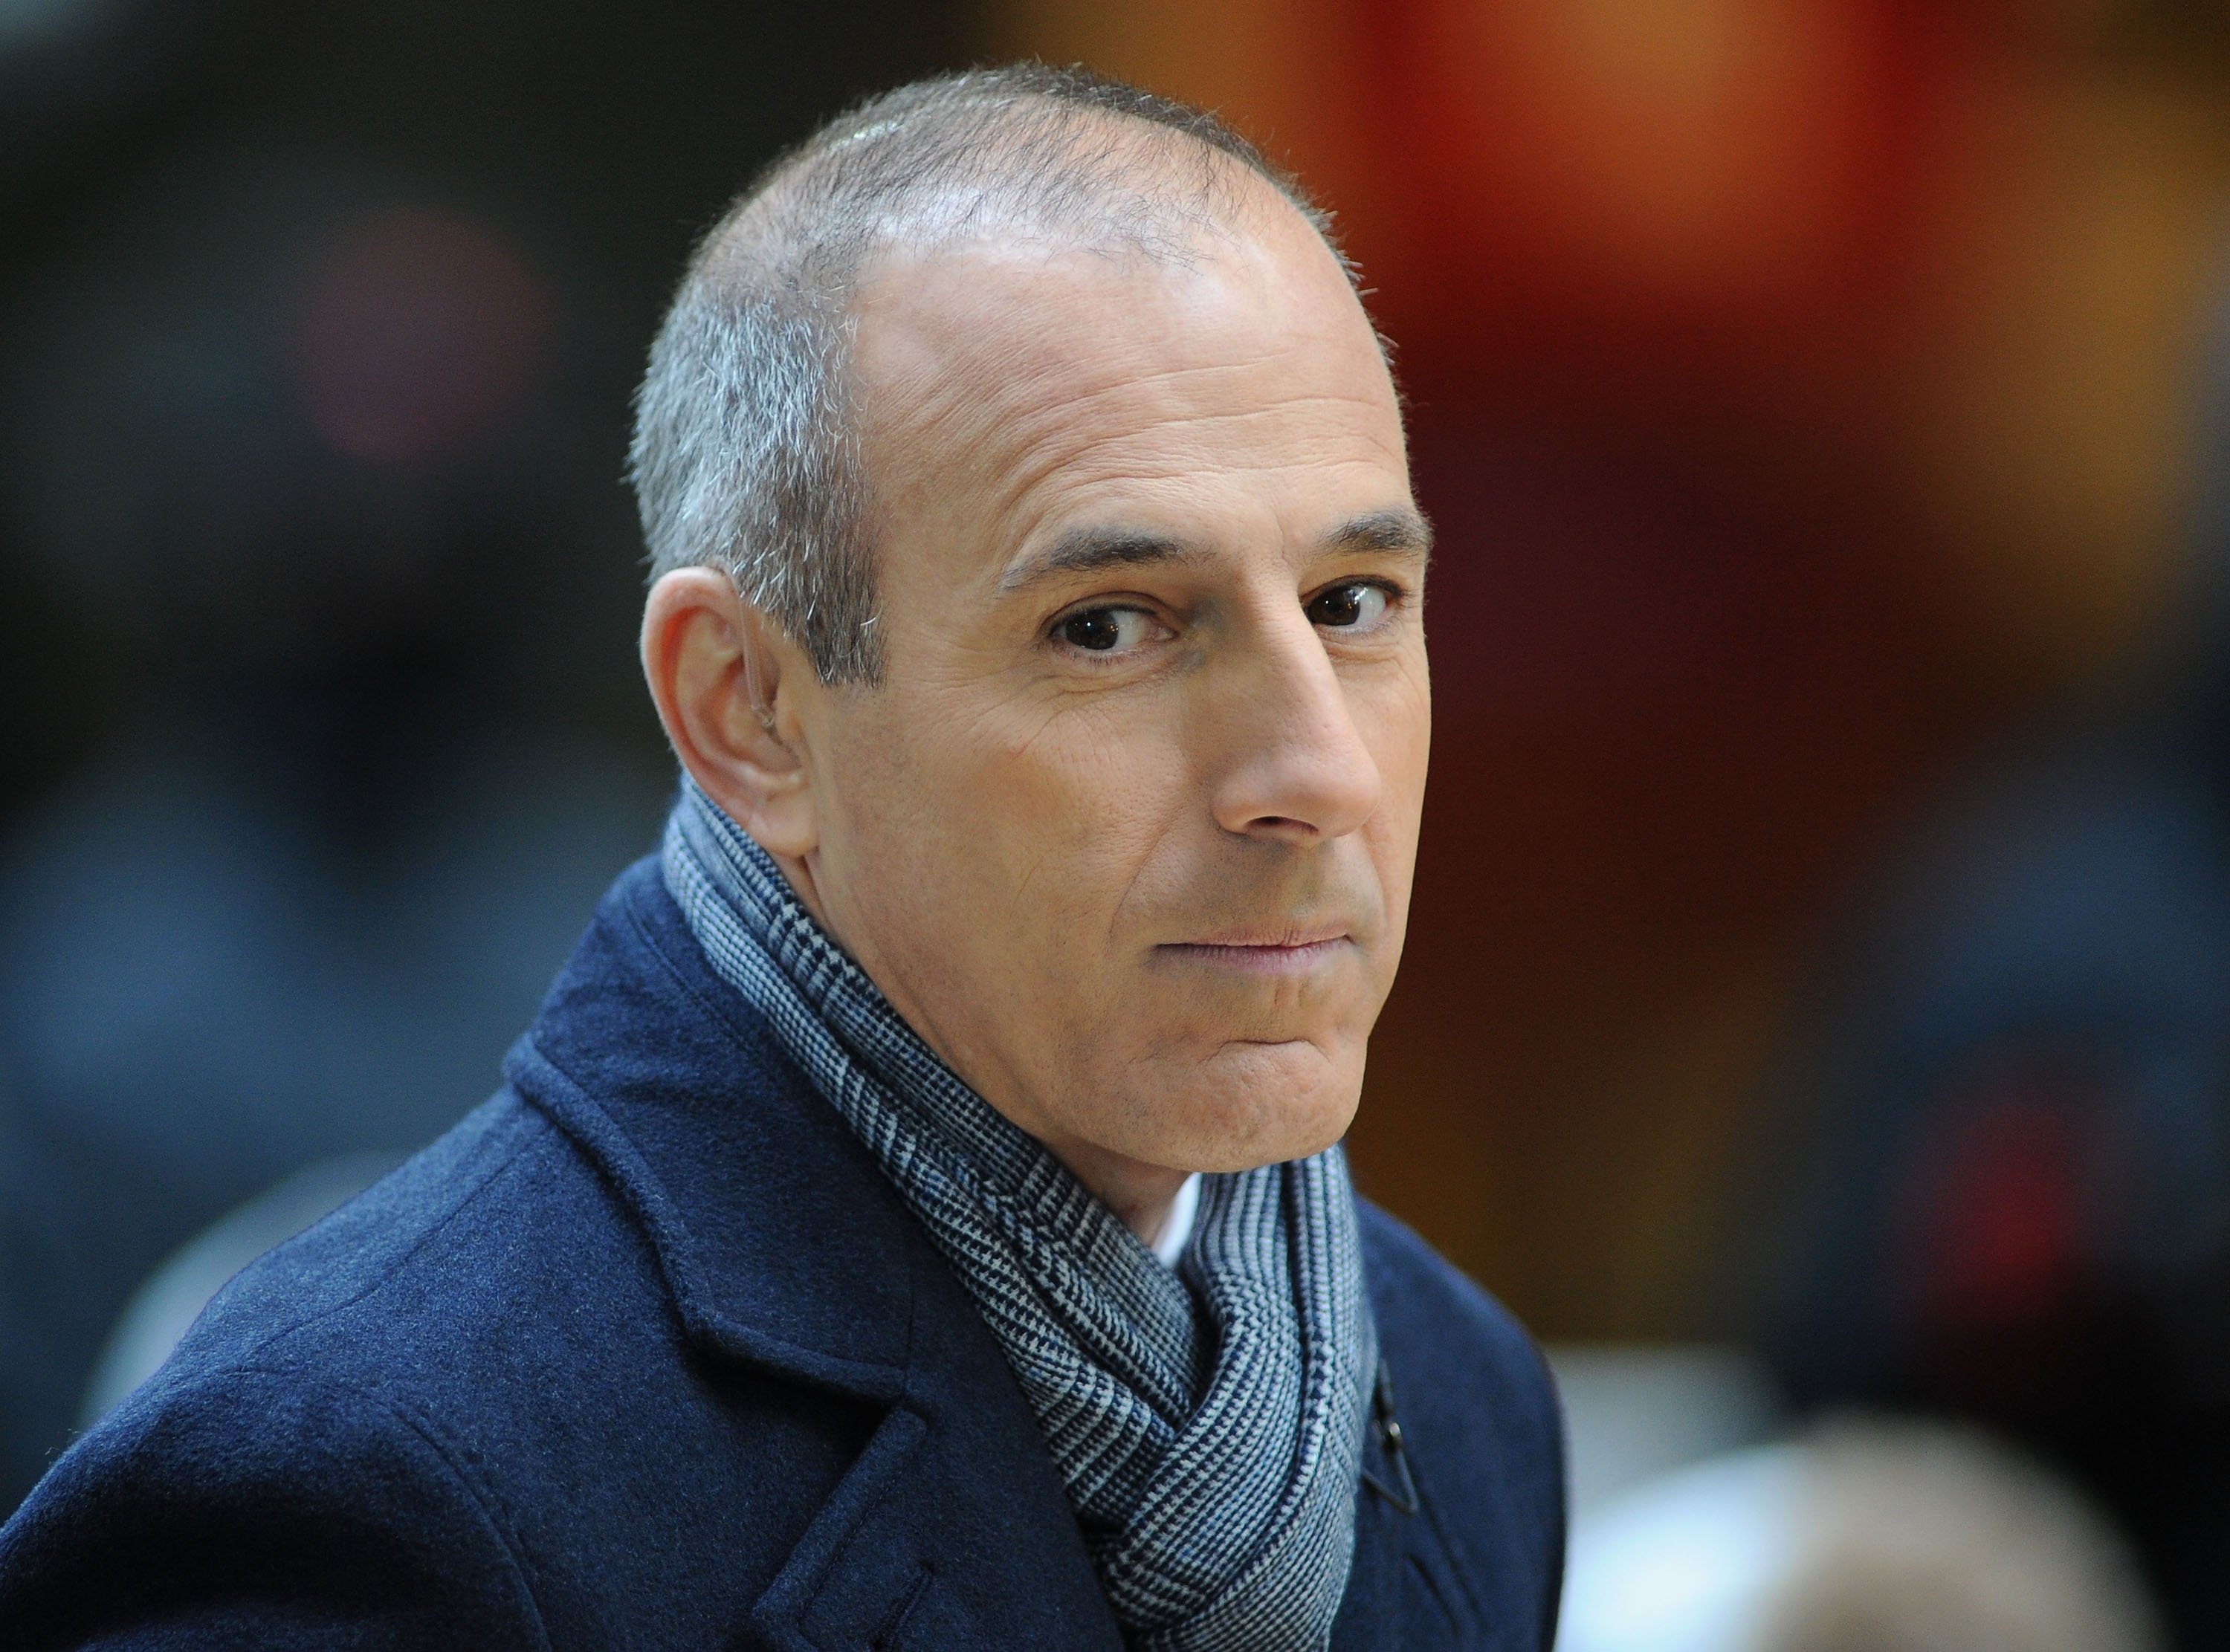 Matt Lauer attends NBC's "Today" at Rockefeller Plaza on November 20, 2012, in New York City. | Source: Getty Images. 